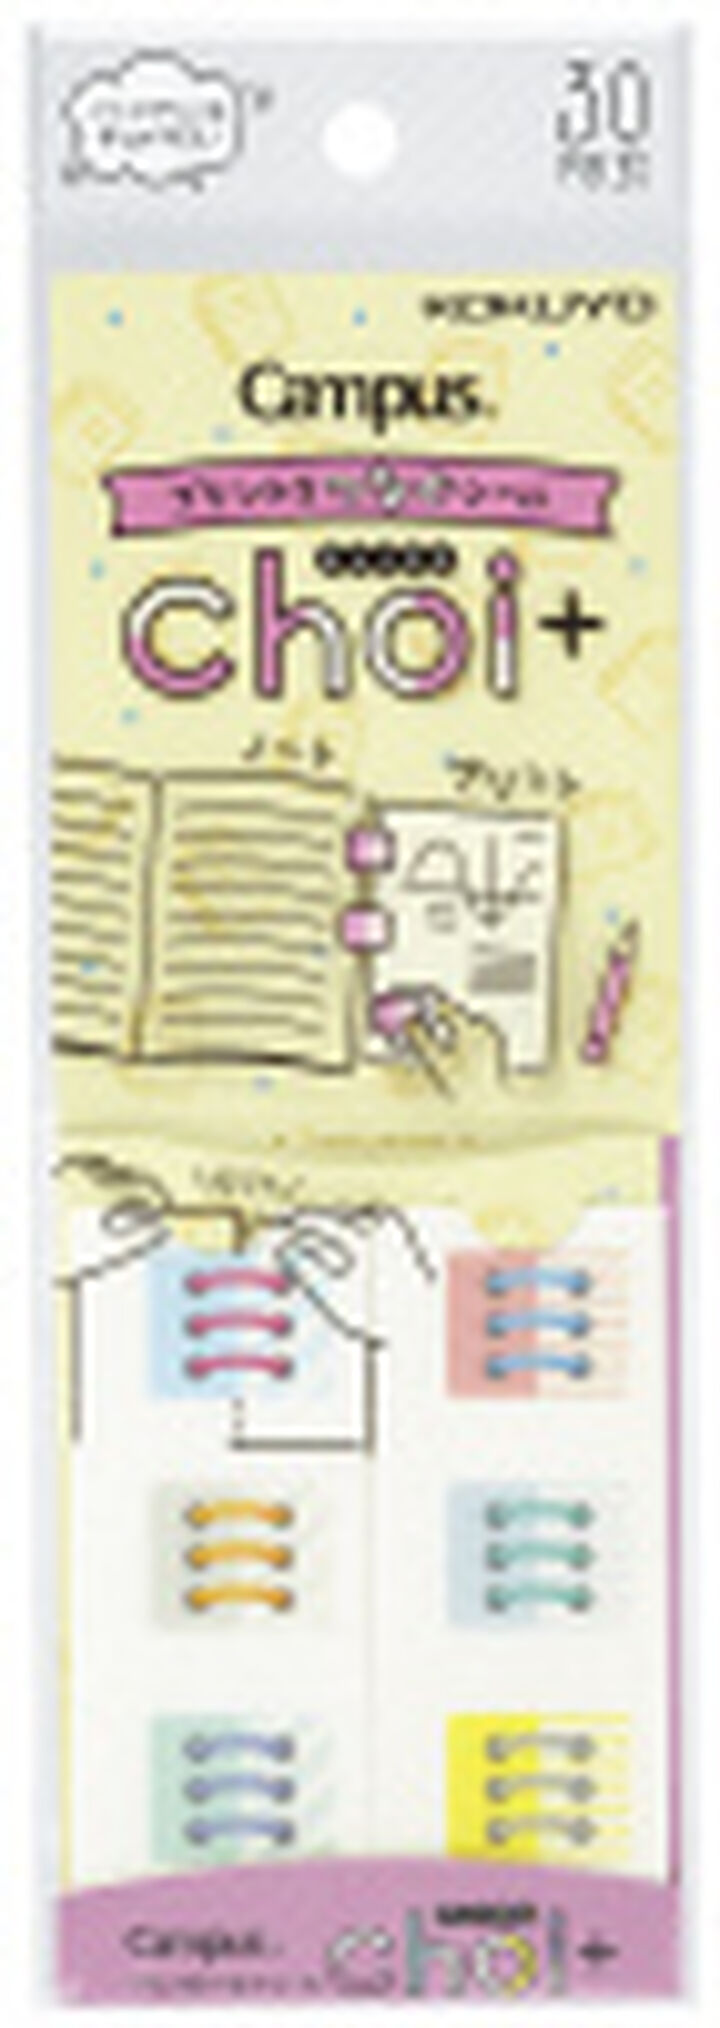 CHOI+ Label Clip pattern,Mixed, medium image number 7